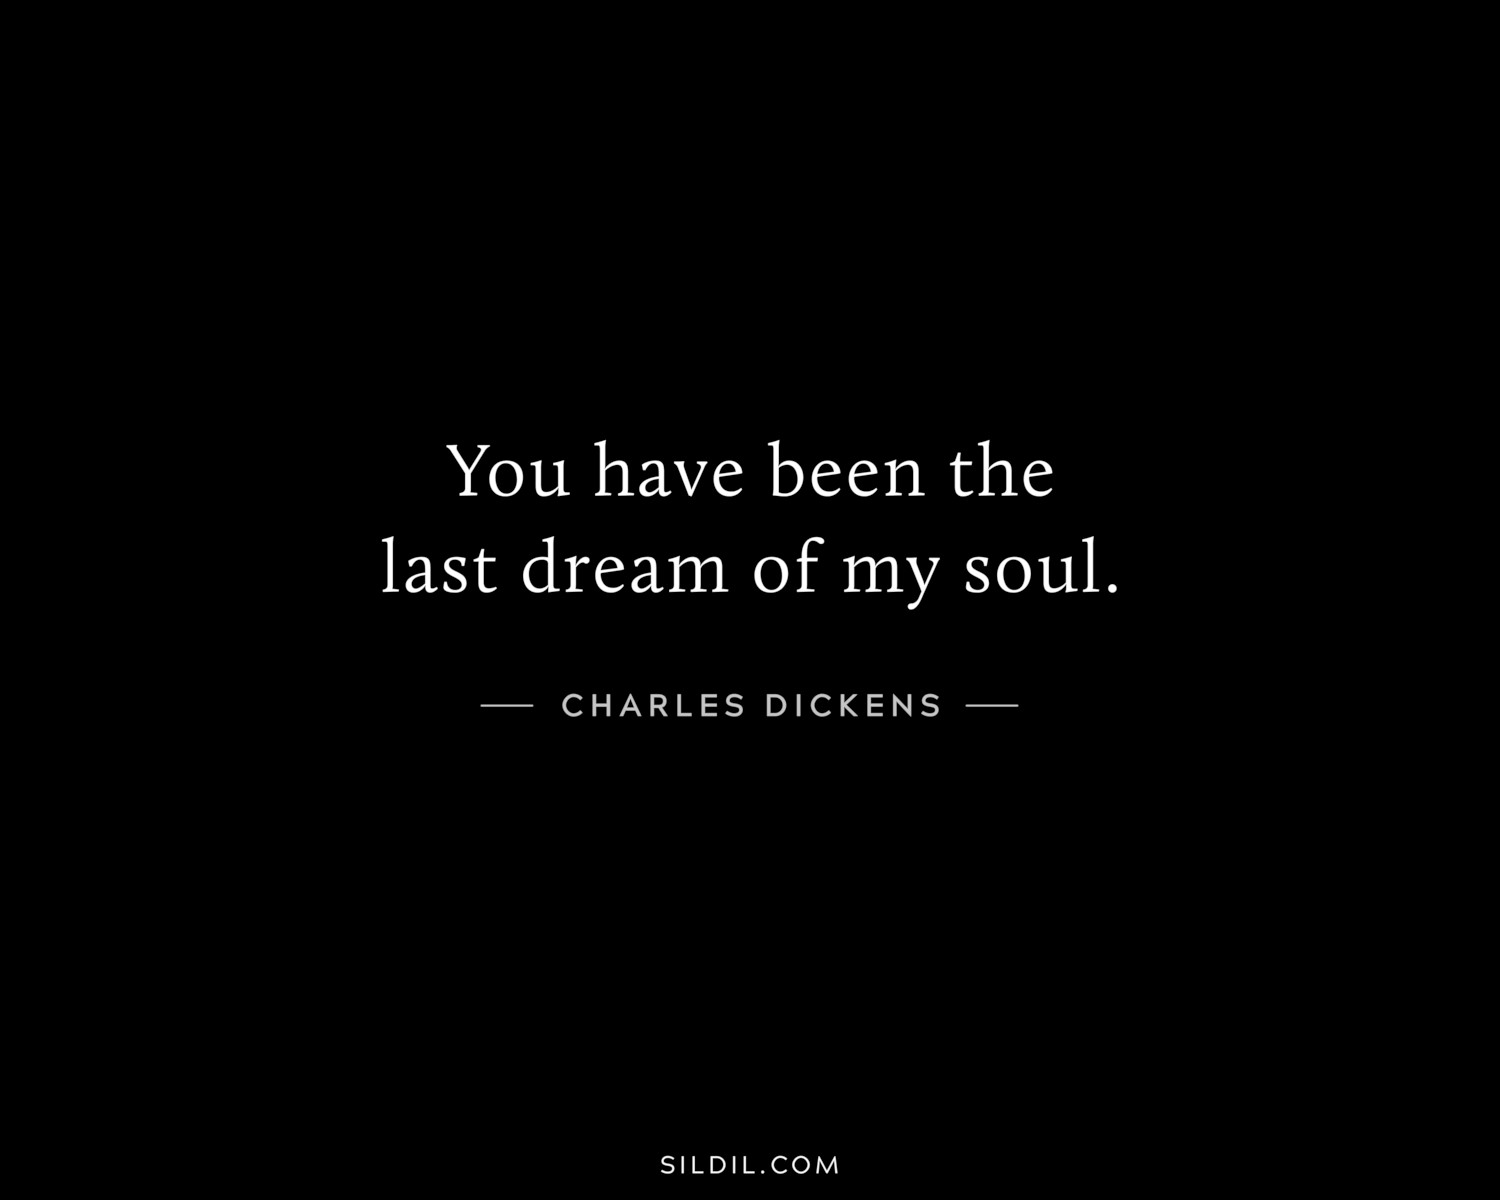 You have been the last dream of my soul.